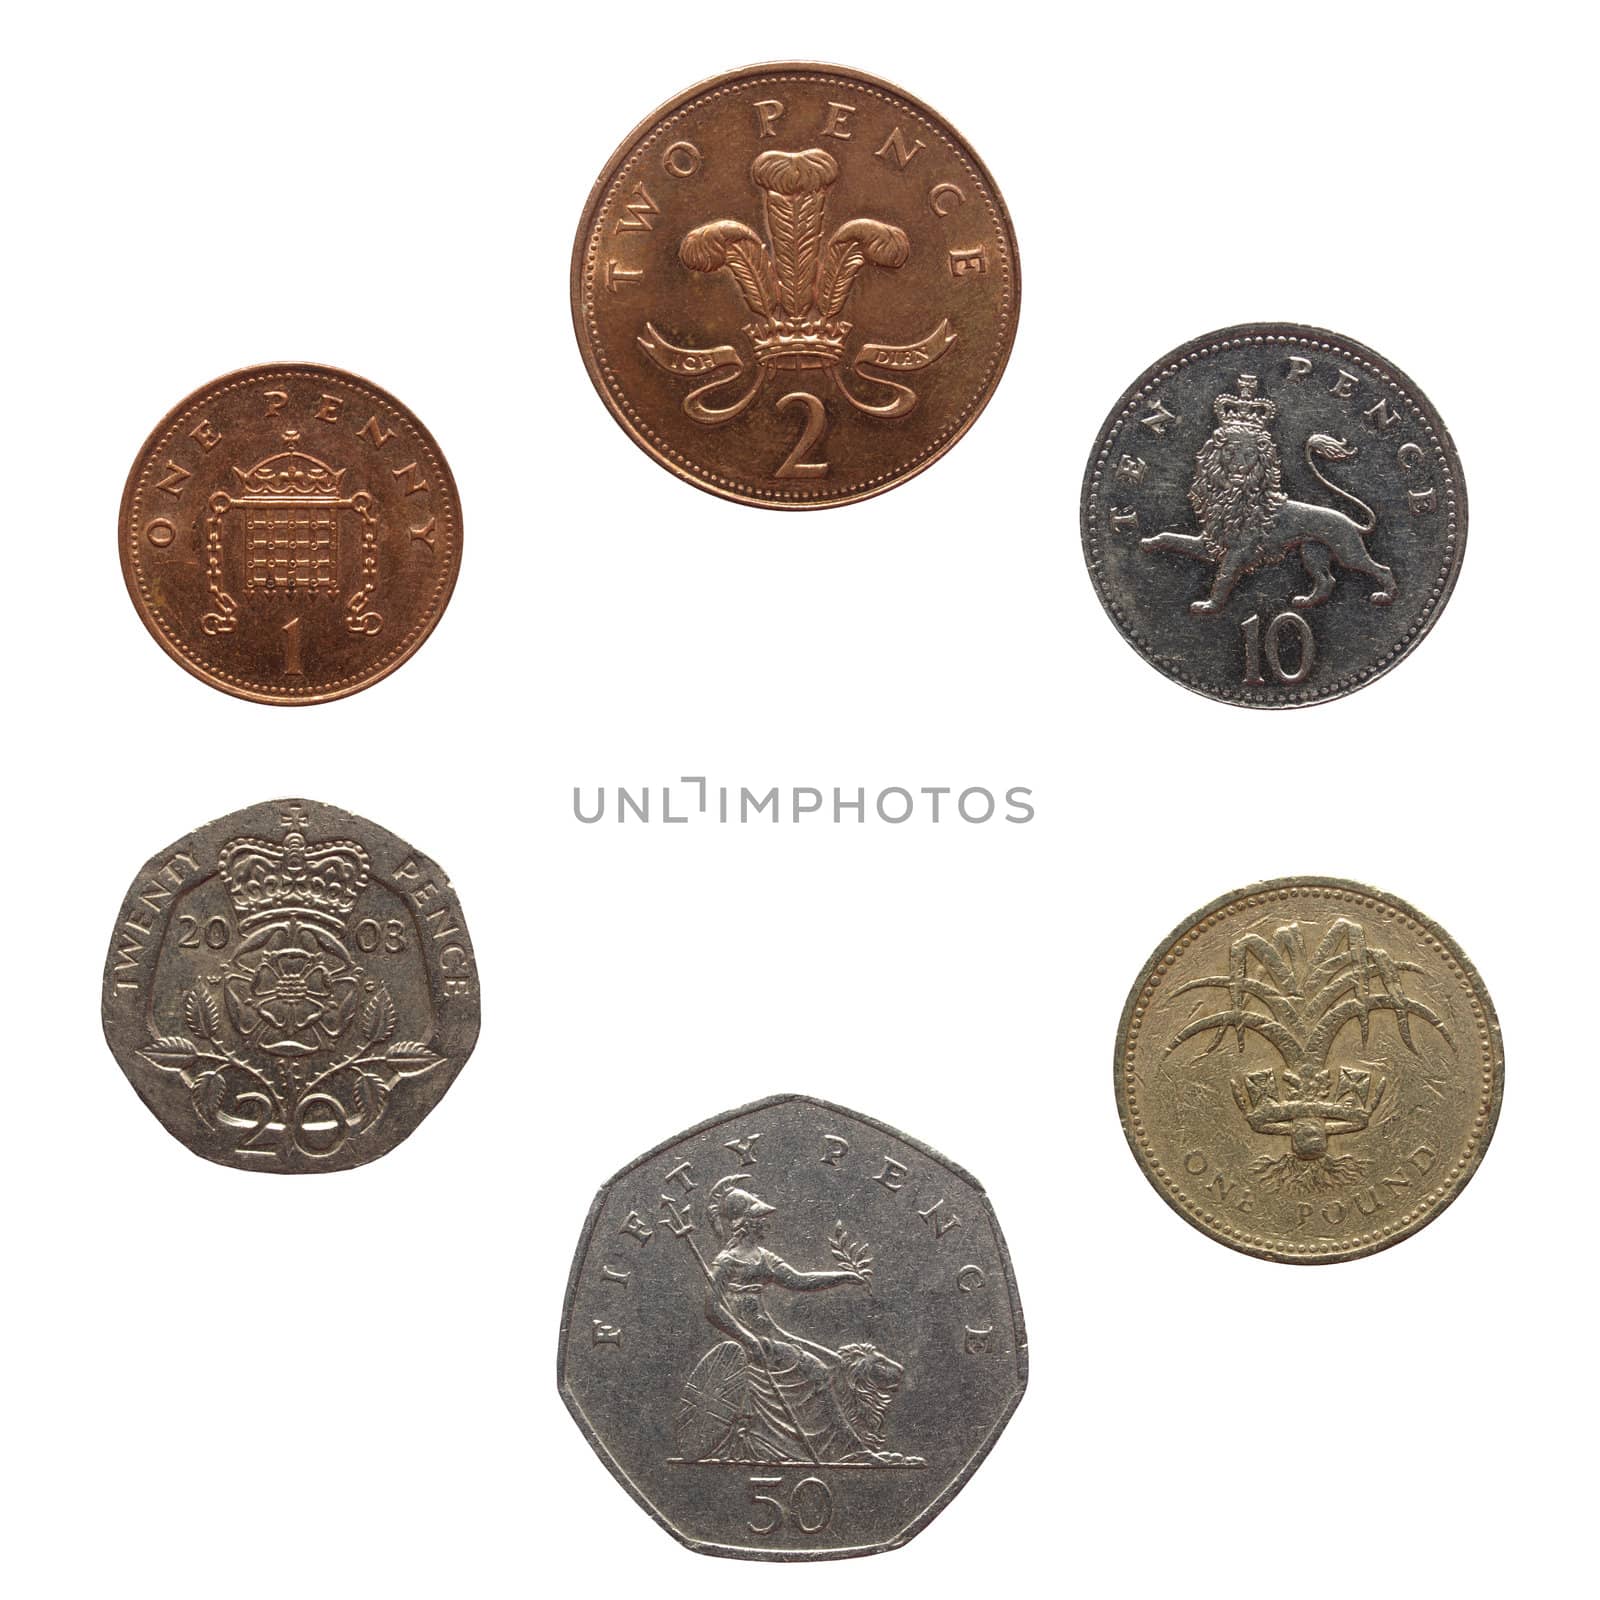 Full range of British coins from 1 Penny to 1 Pound isolated over white